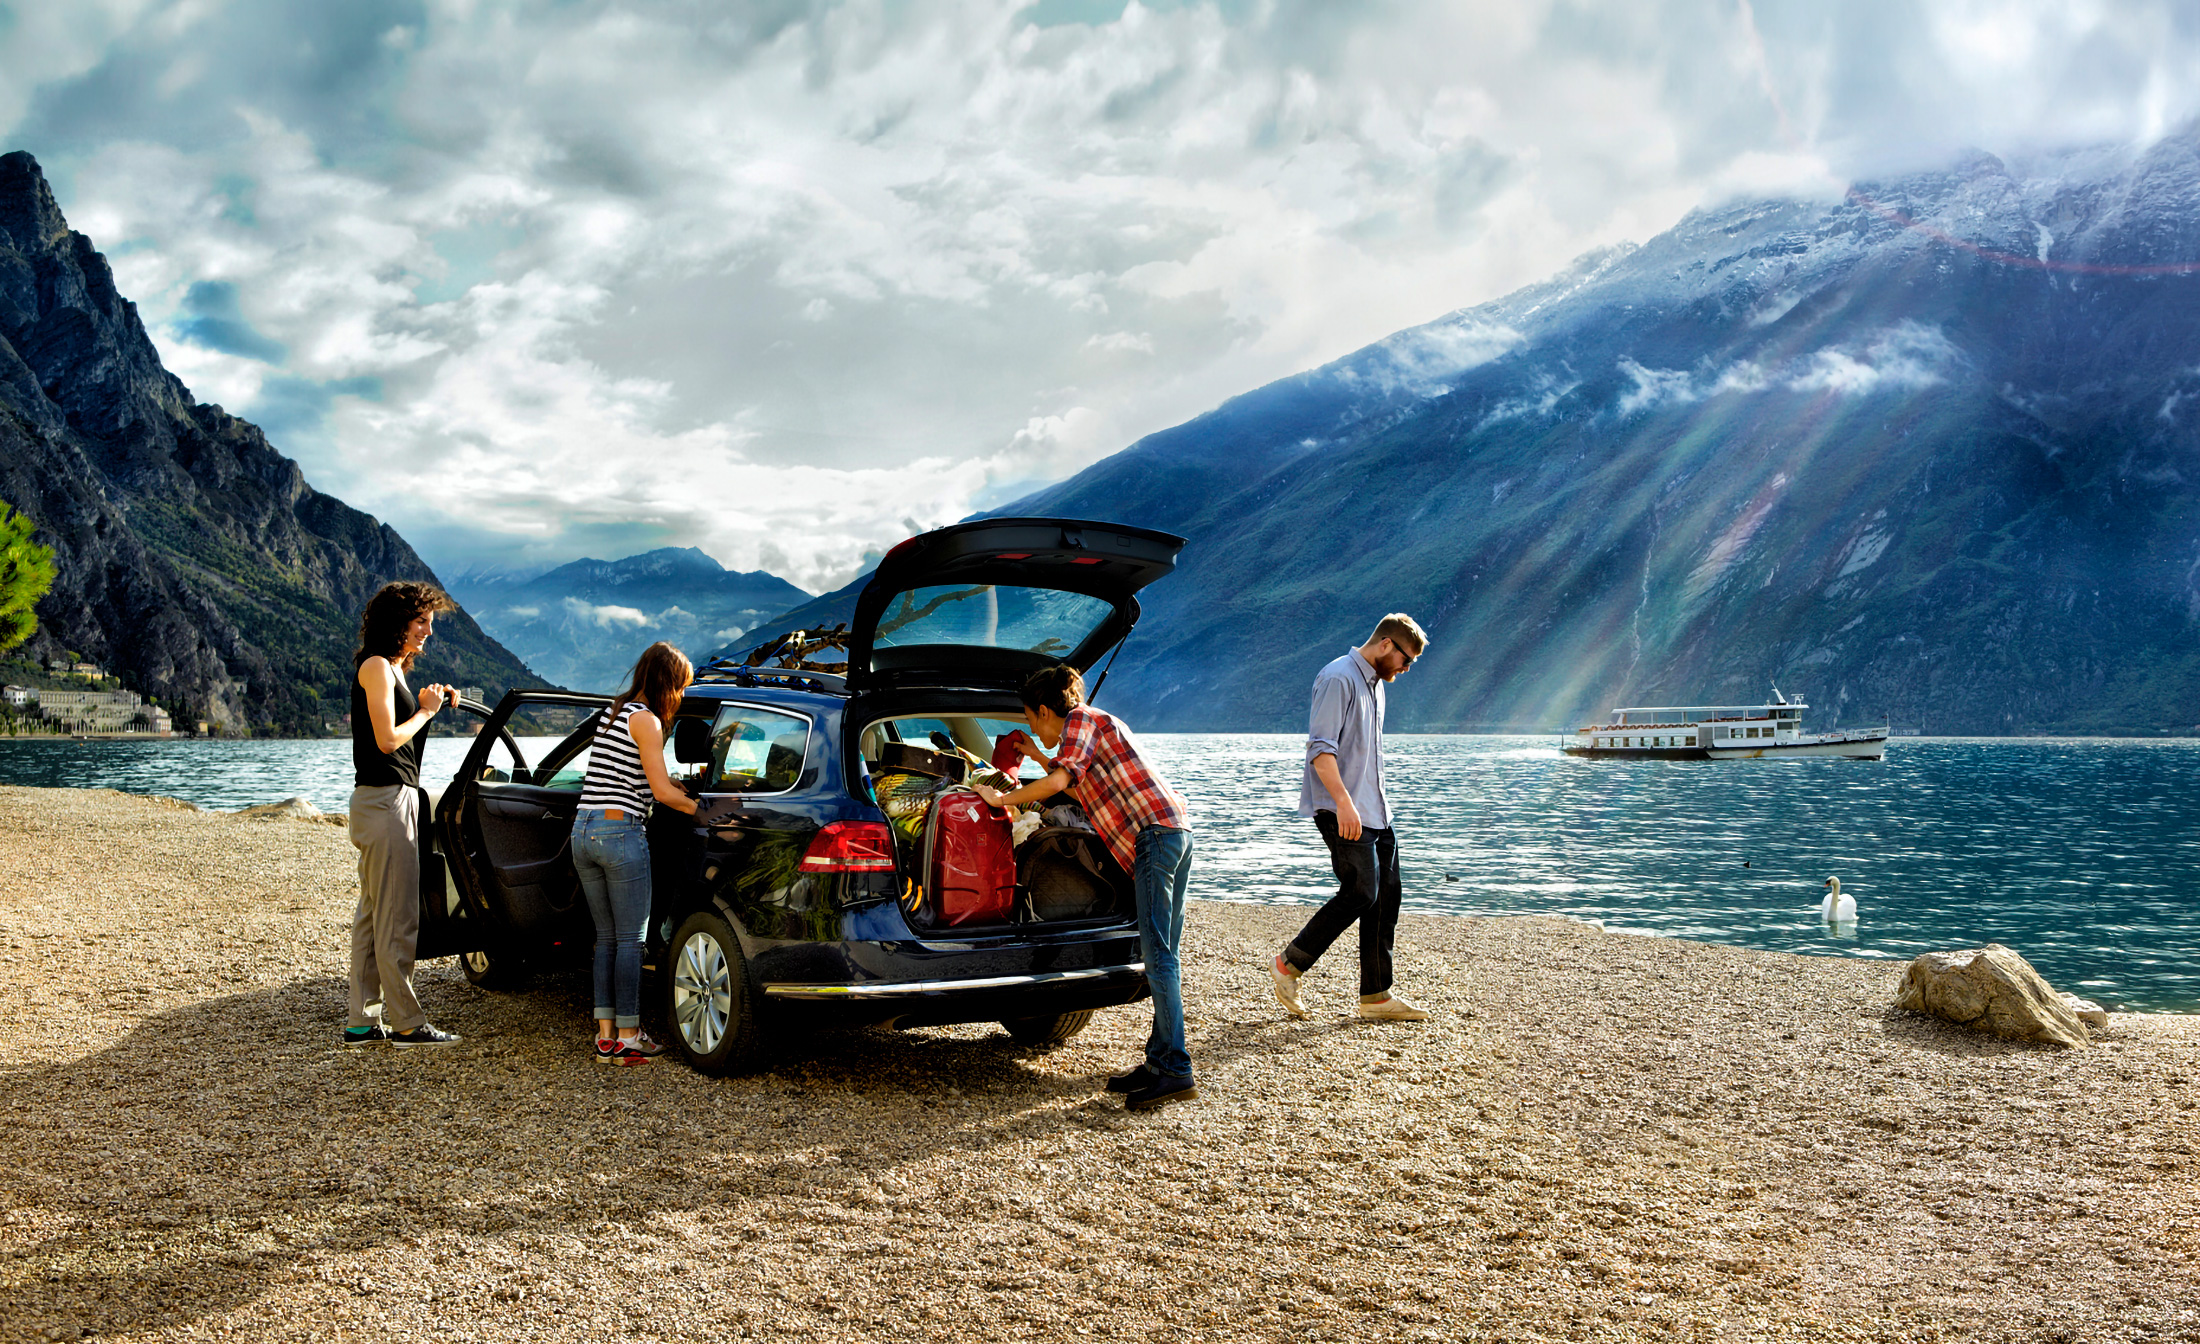 A scene by a lake with mountains in the background. There is a car parked on a gravel beach, and several people seem to be busy unloading the car. A man is walking towards the water, and two women are standing next to the car's open trunk. It's sunny weather with a few clouds, which gives a soft light over the scene, a ship can be seen in the distance on the water. It appears to be a relaxing day outdoors with friends.